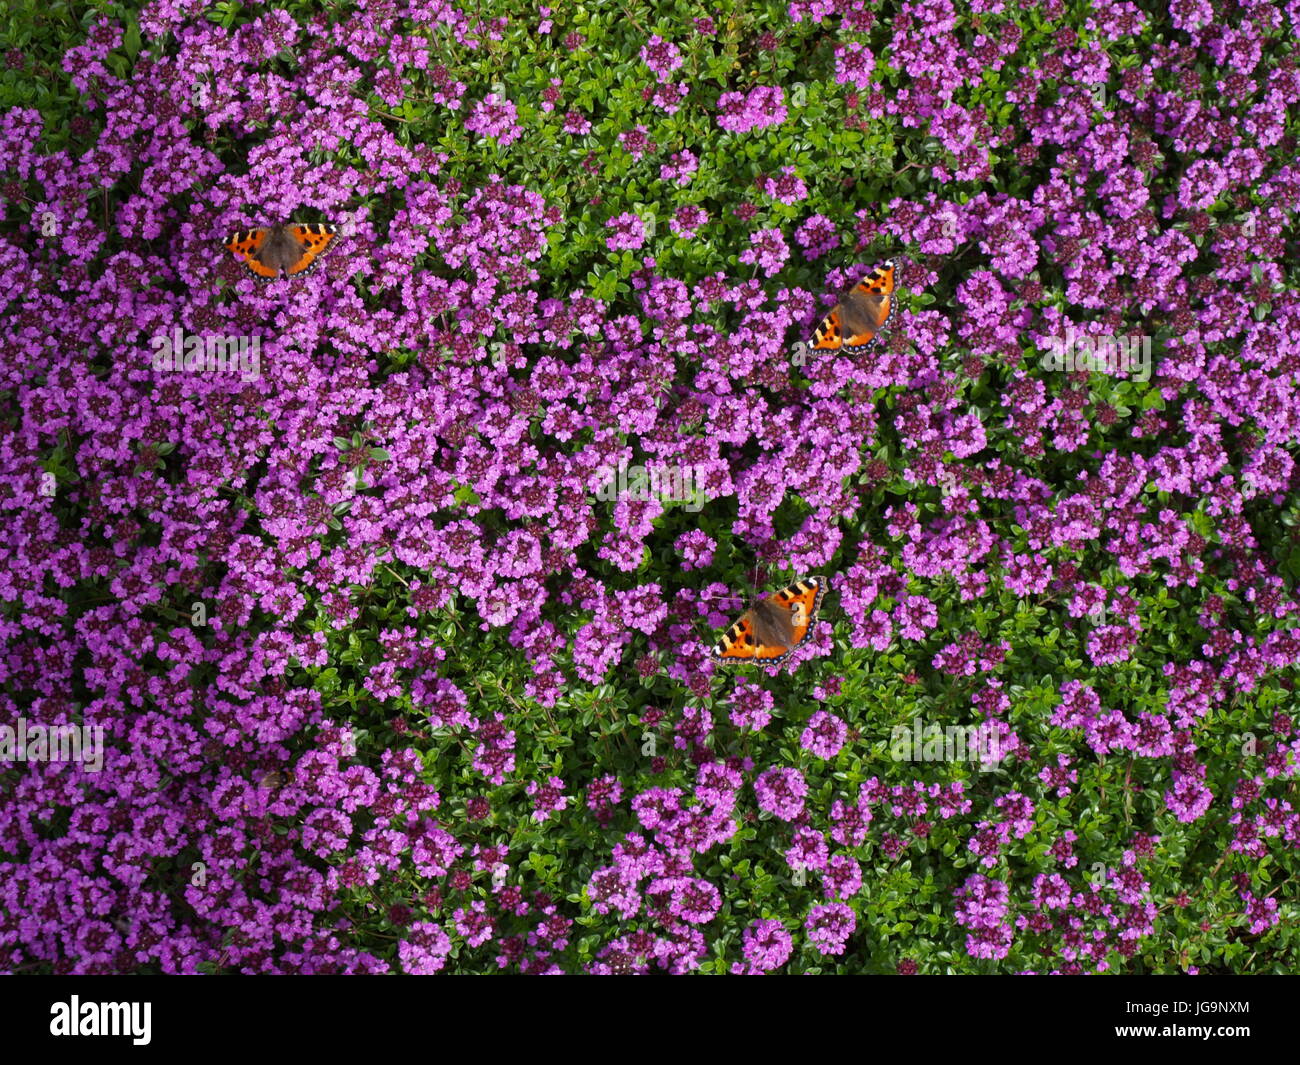 Small tortoiseshell butterfly on a carpet of thyme Stock Photo